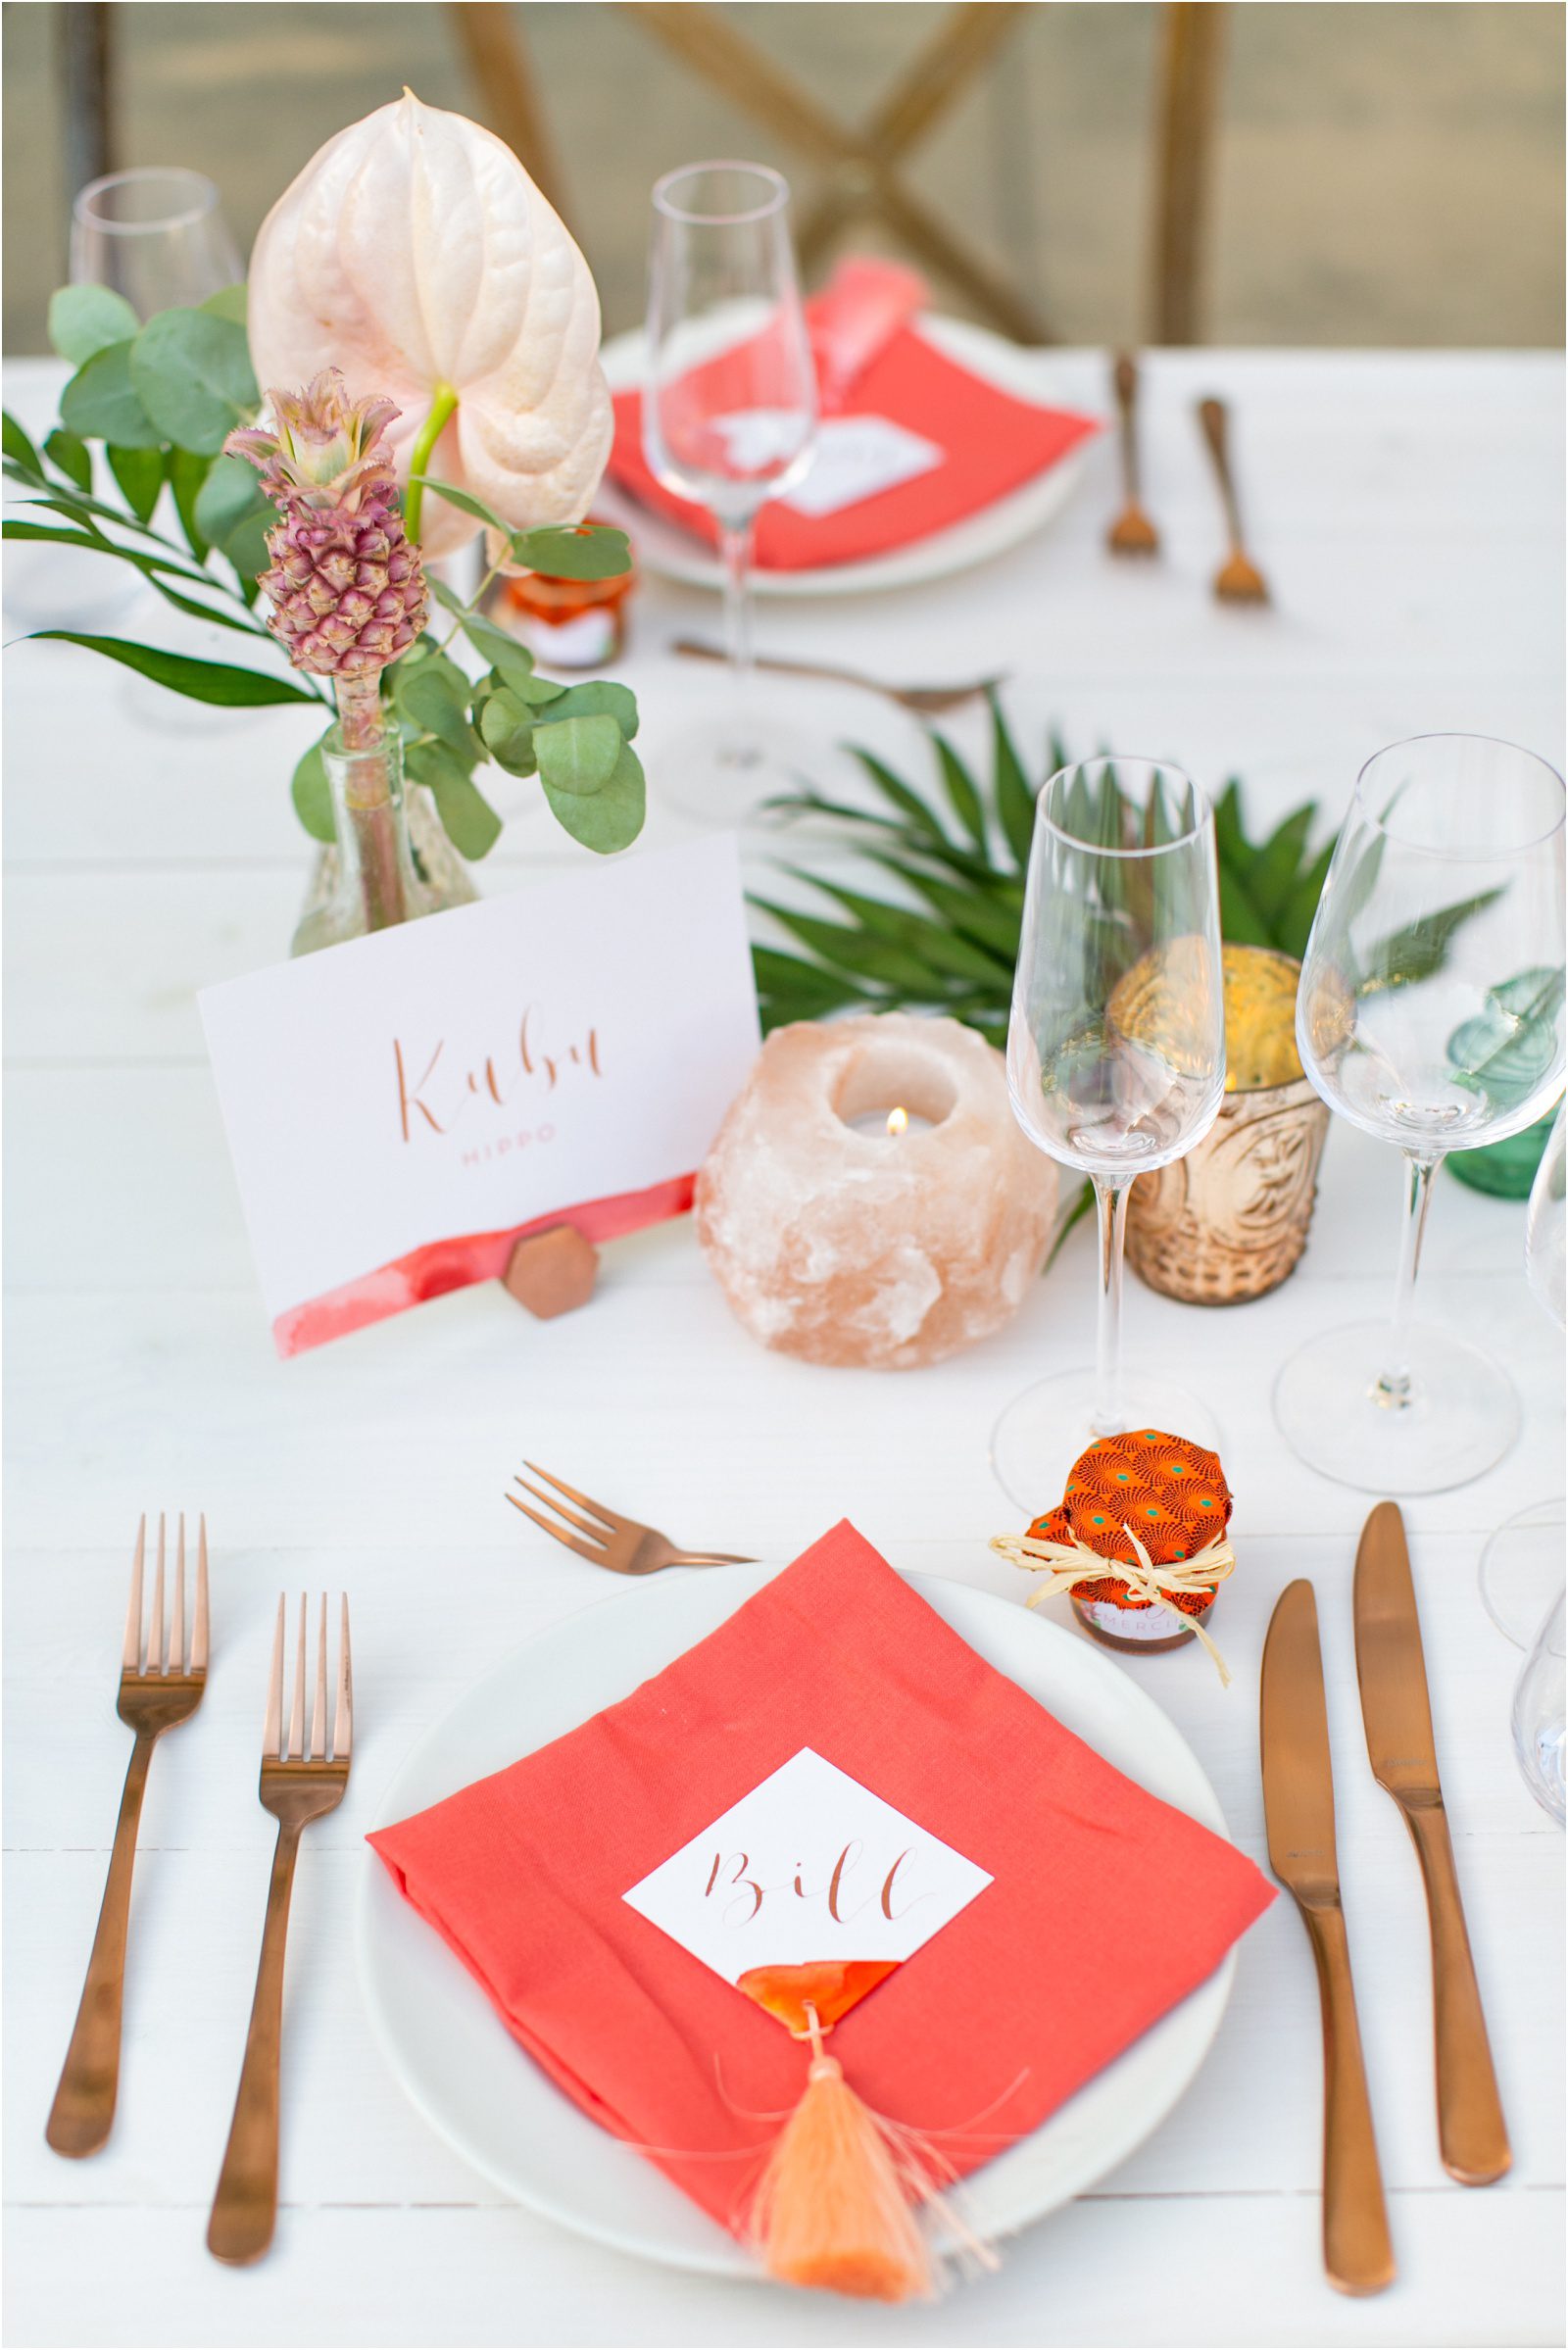 French Tropical Chic wedding style at La Leotardie in France